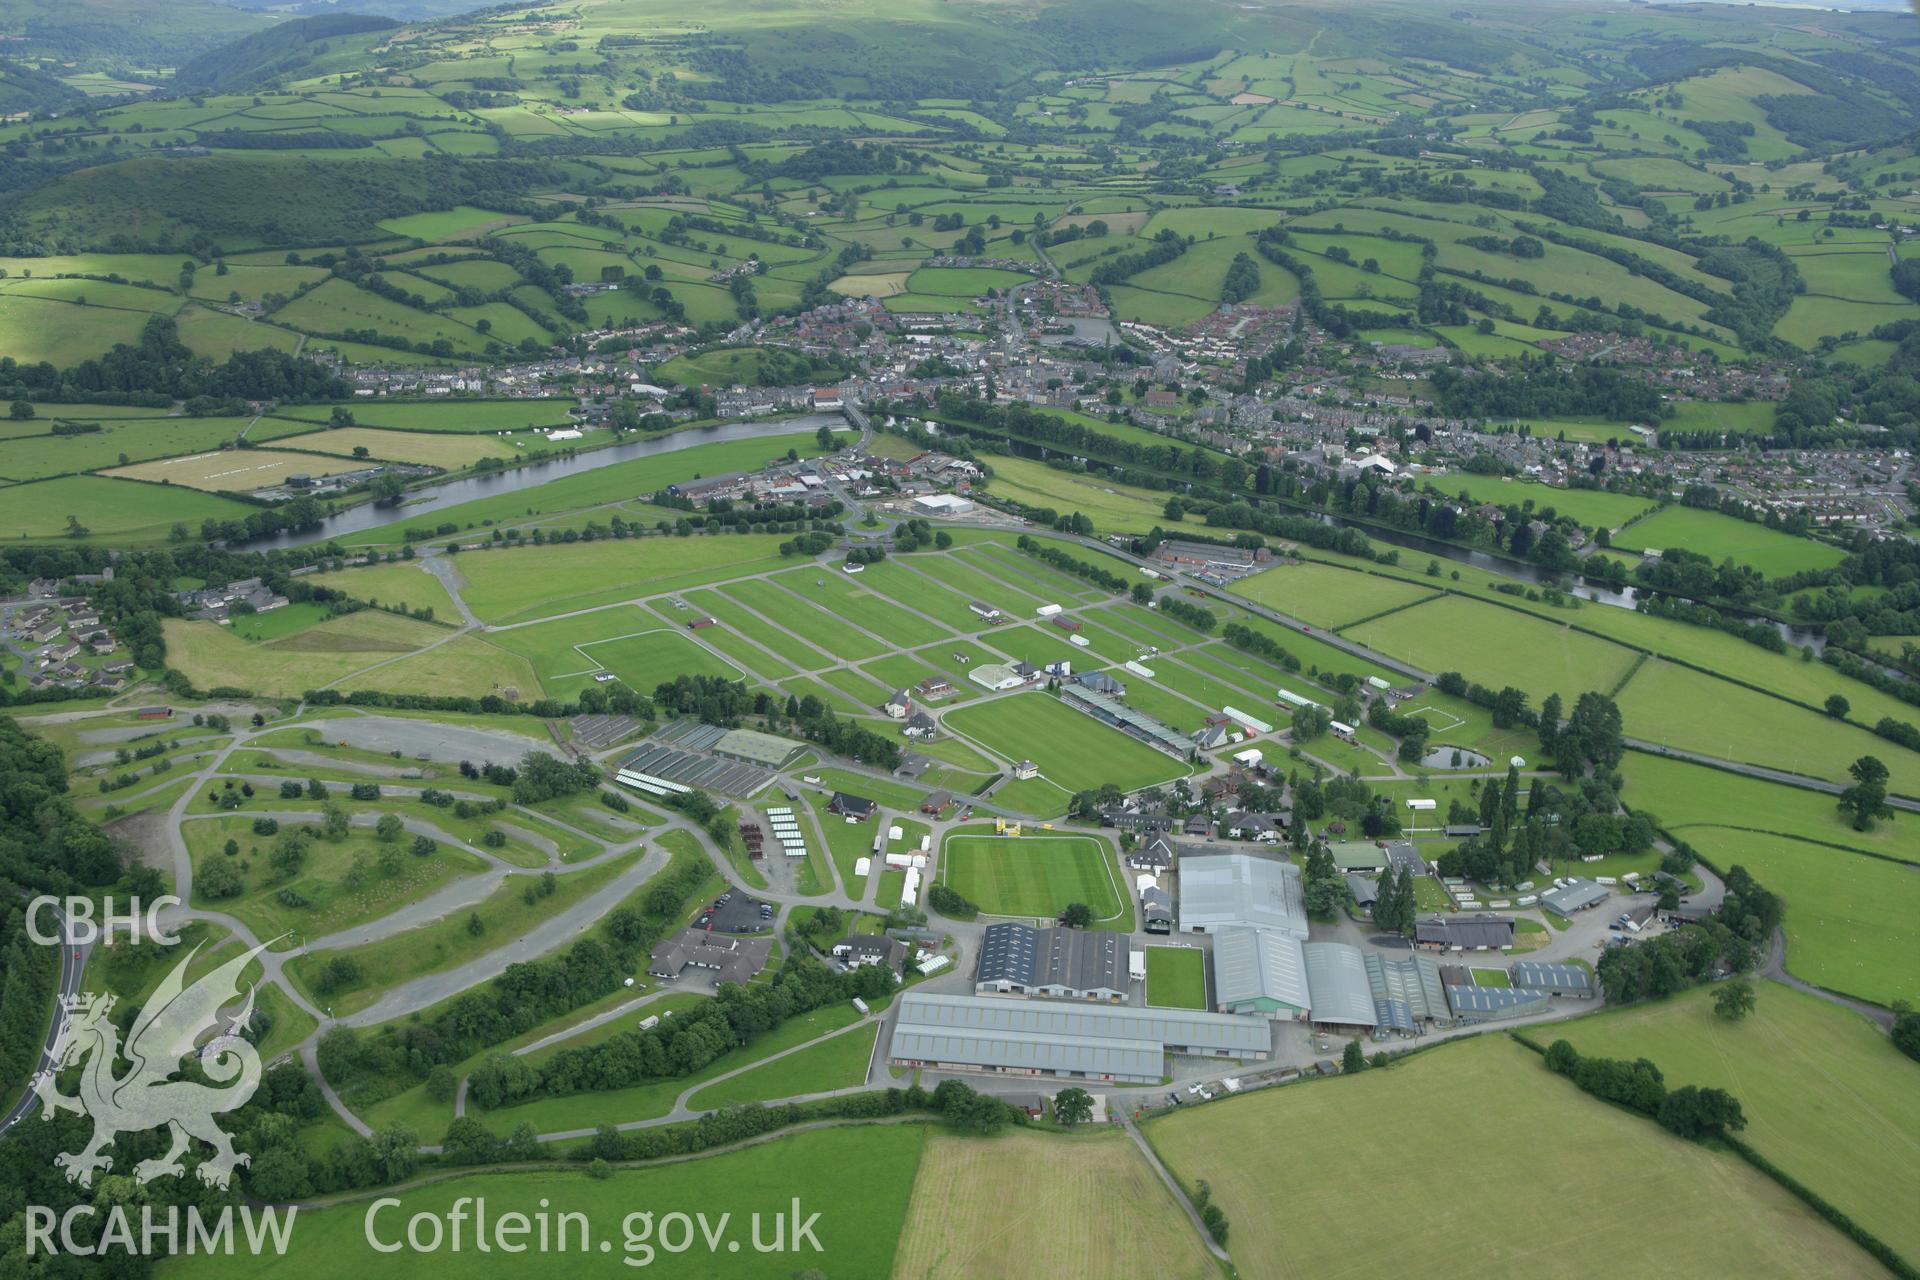 RCAHMW colour oblique aerial photograph of Royal Welsh Showground, Llanelwedd. Taken on 09 July 2007 by Toby Driver